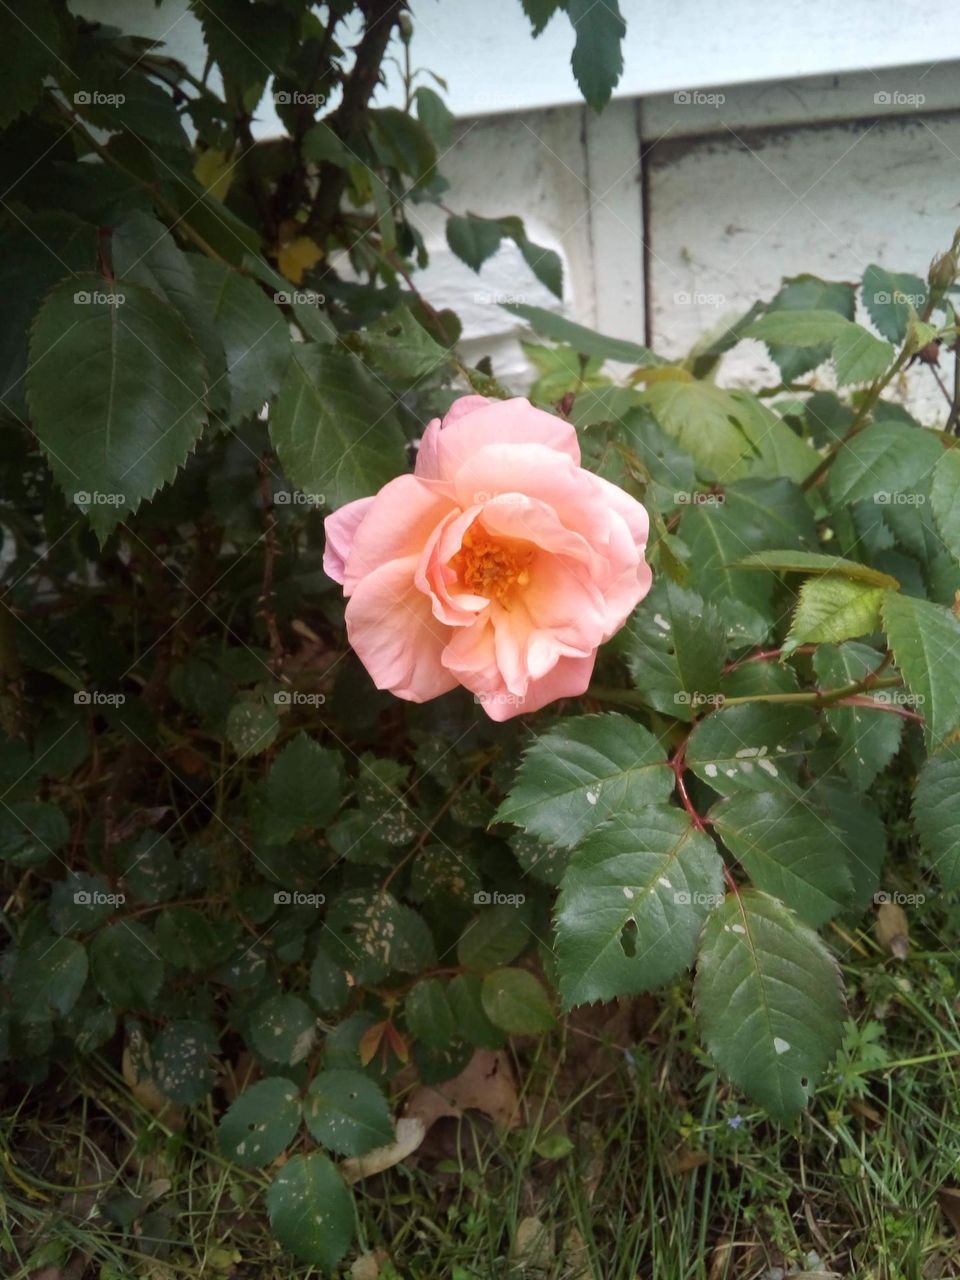 a photo from last year my rose's haven't bloomed yet this year,  still waiting and waiting.